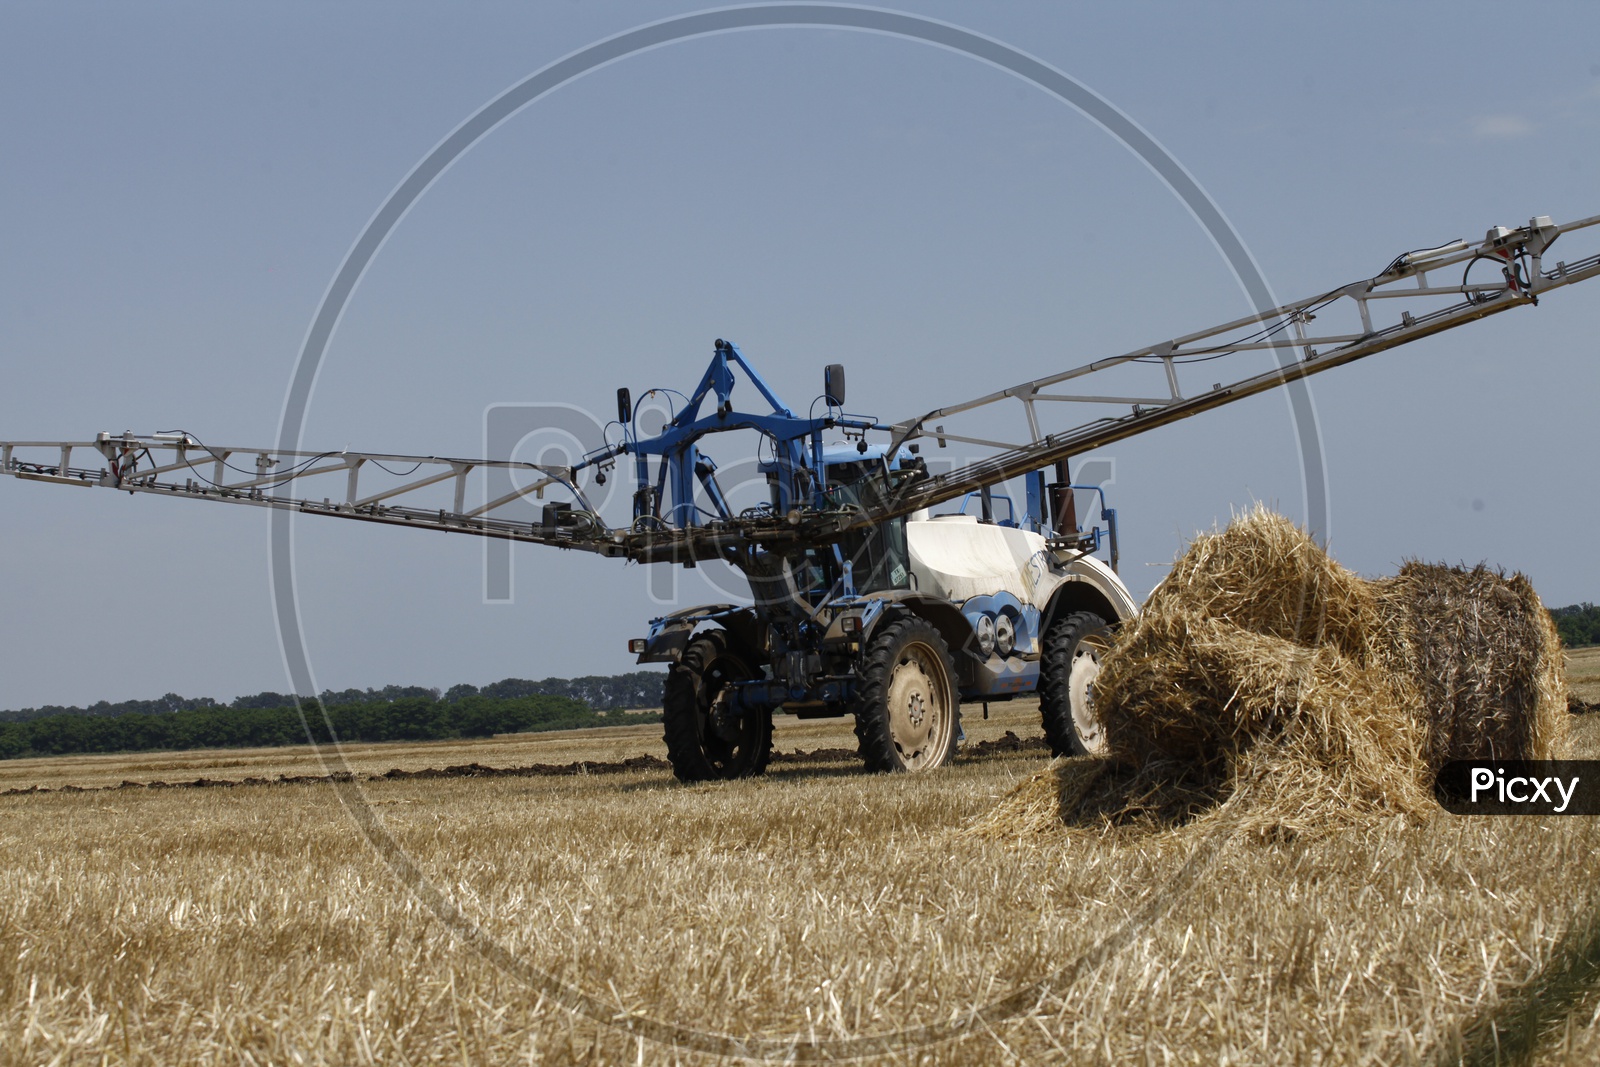 Paddy Harvesting Machines in Agricultural Fields